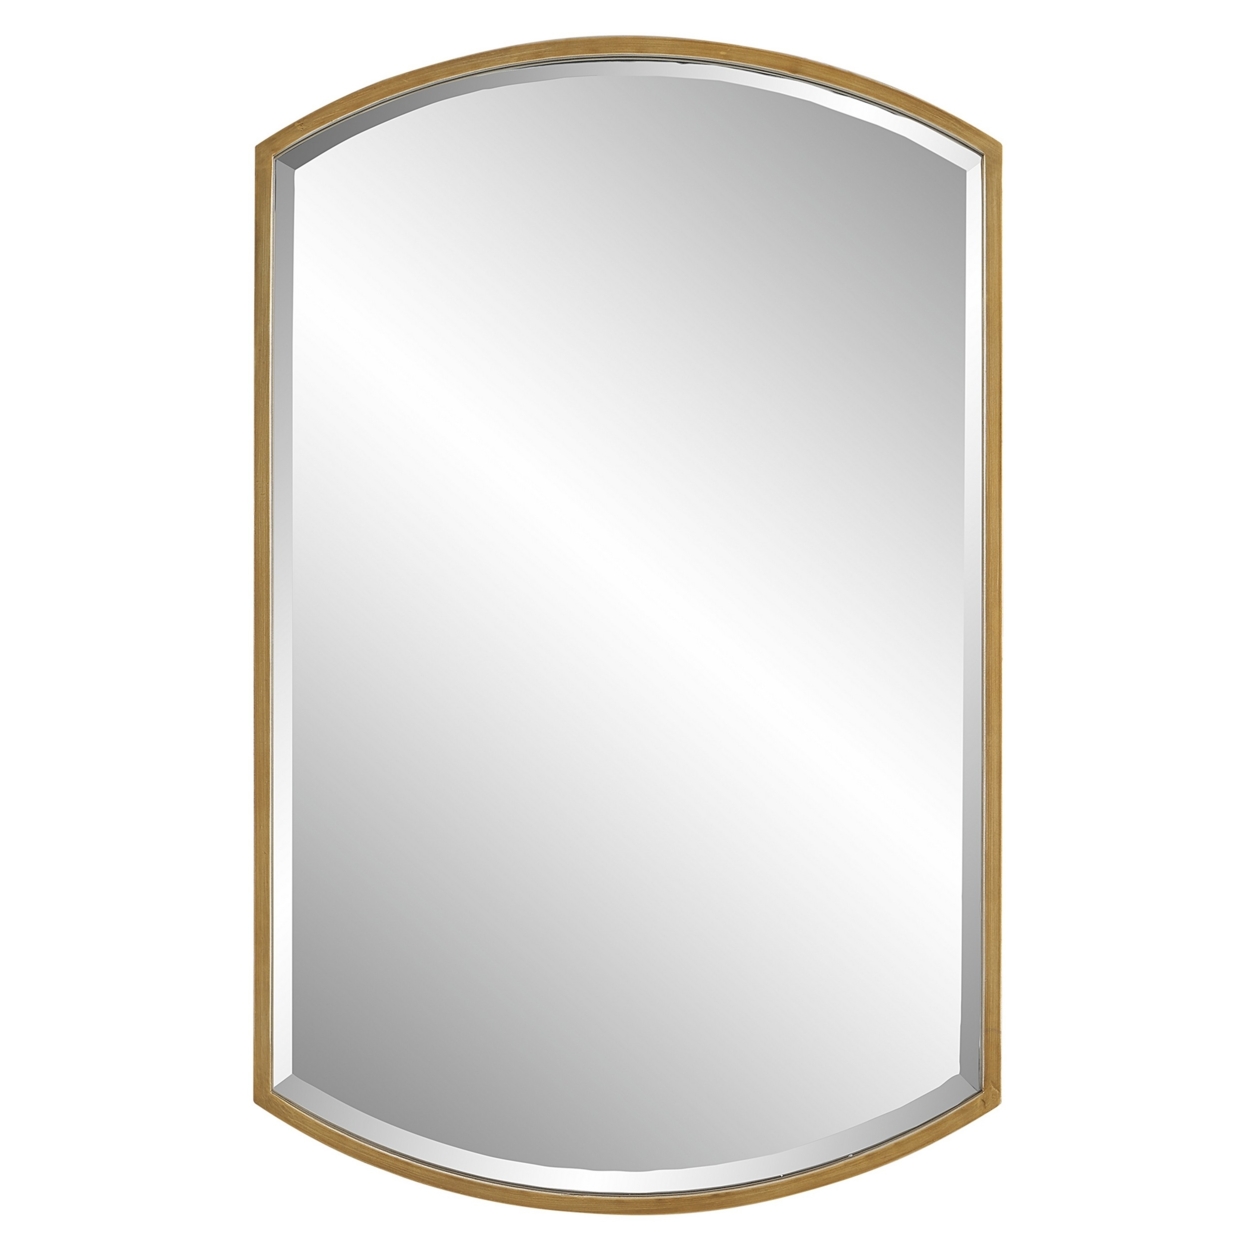 22 X 35 Modern Rectangular Mirror With Arches And Bevels, Gold, Silver- Saltoro Sherpi